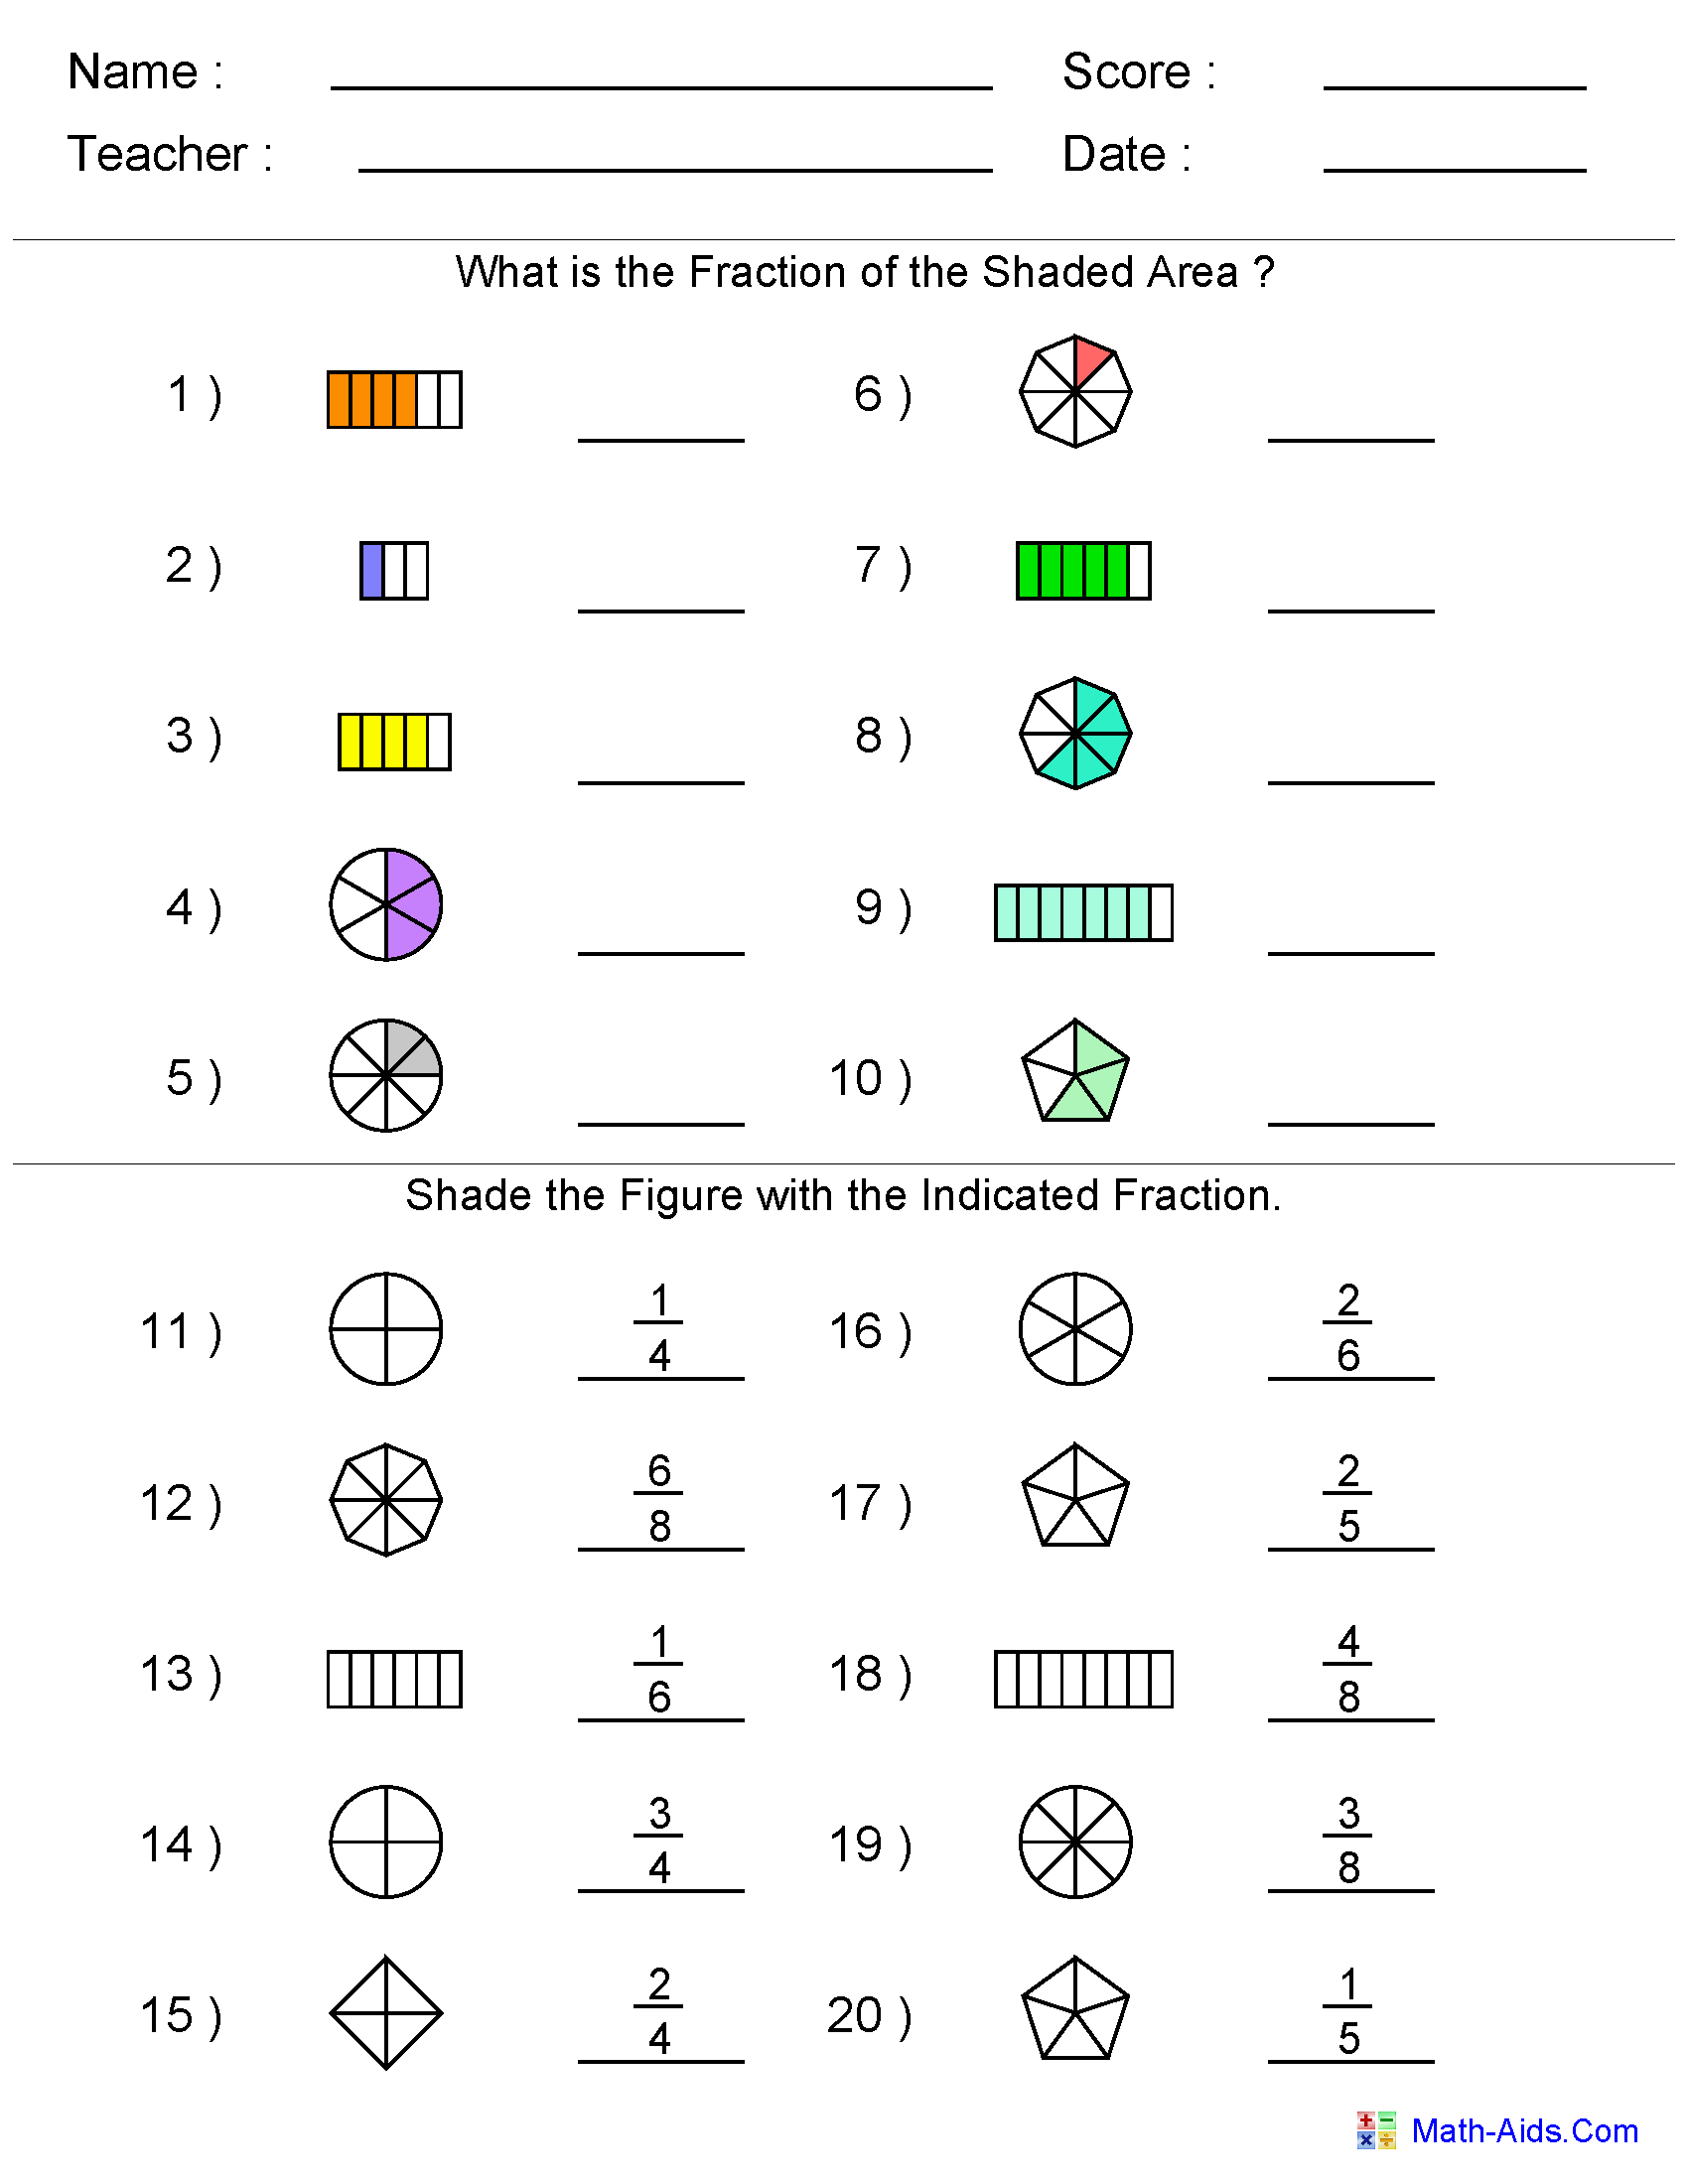 Fractions Worksheets | Printable Fractions Worksheets For Teachers - Free Printable Fraction Worksheets